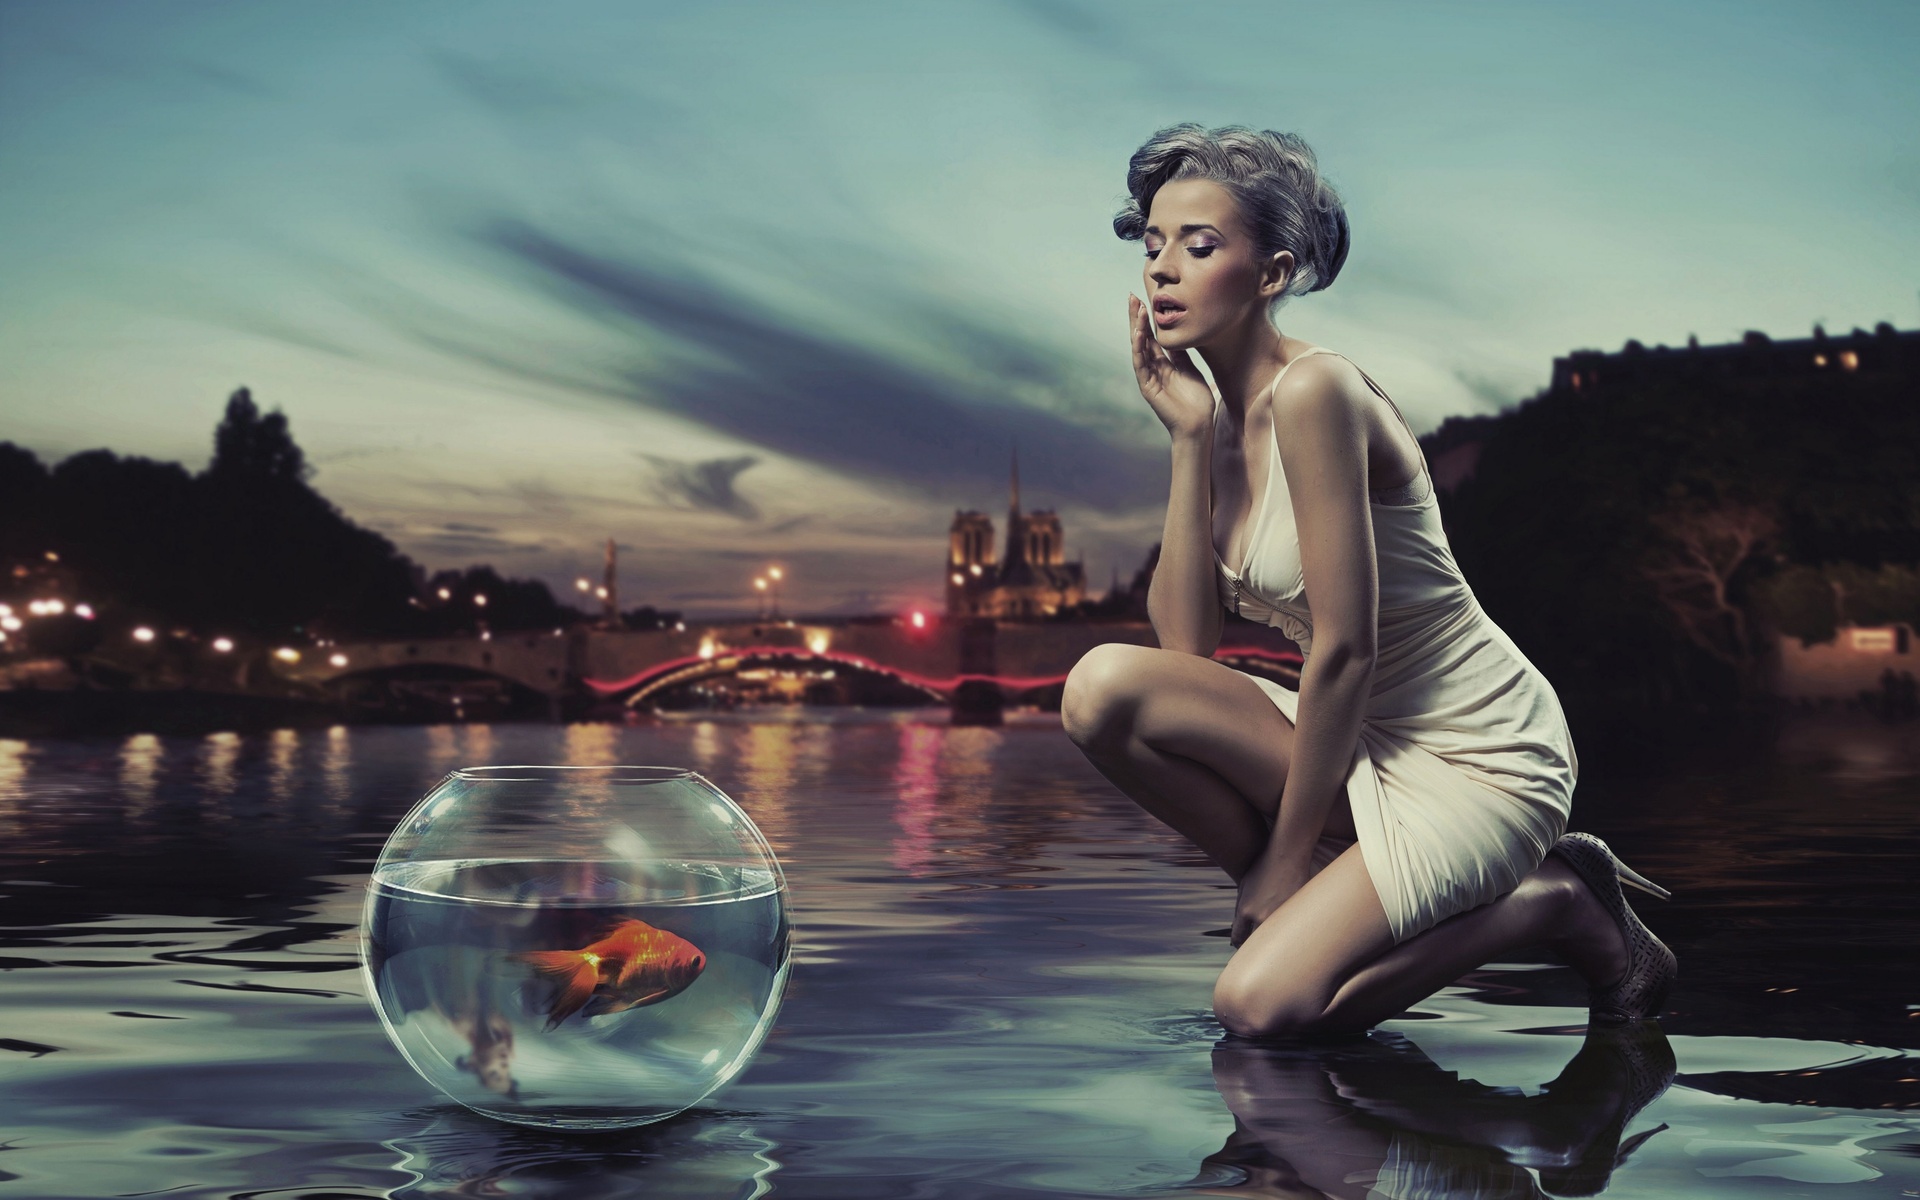 manipulation, Advertising, Products, Situation, Animals, Fishes, Glass, Bowl, Sphere, Globe, Gold, Water, Pool, Reflection, Skies, Clouds, Night, Lights, Women, Females, Girls, Models, Blonde, Babes, Style, Fashi Wallpaper